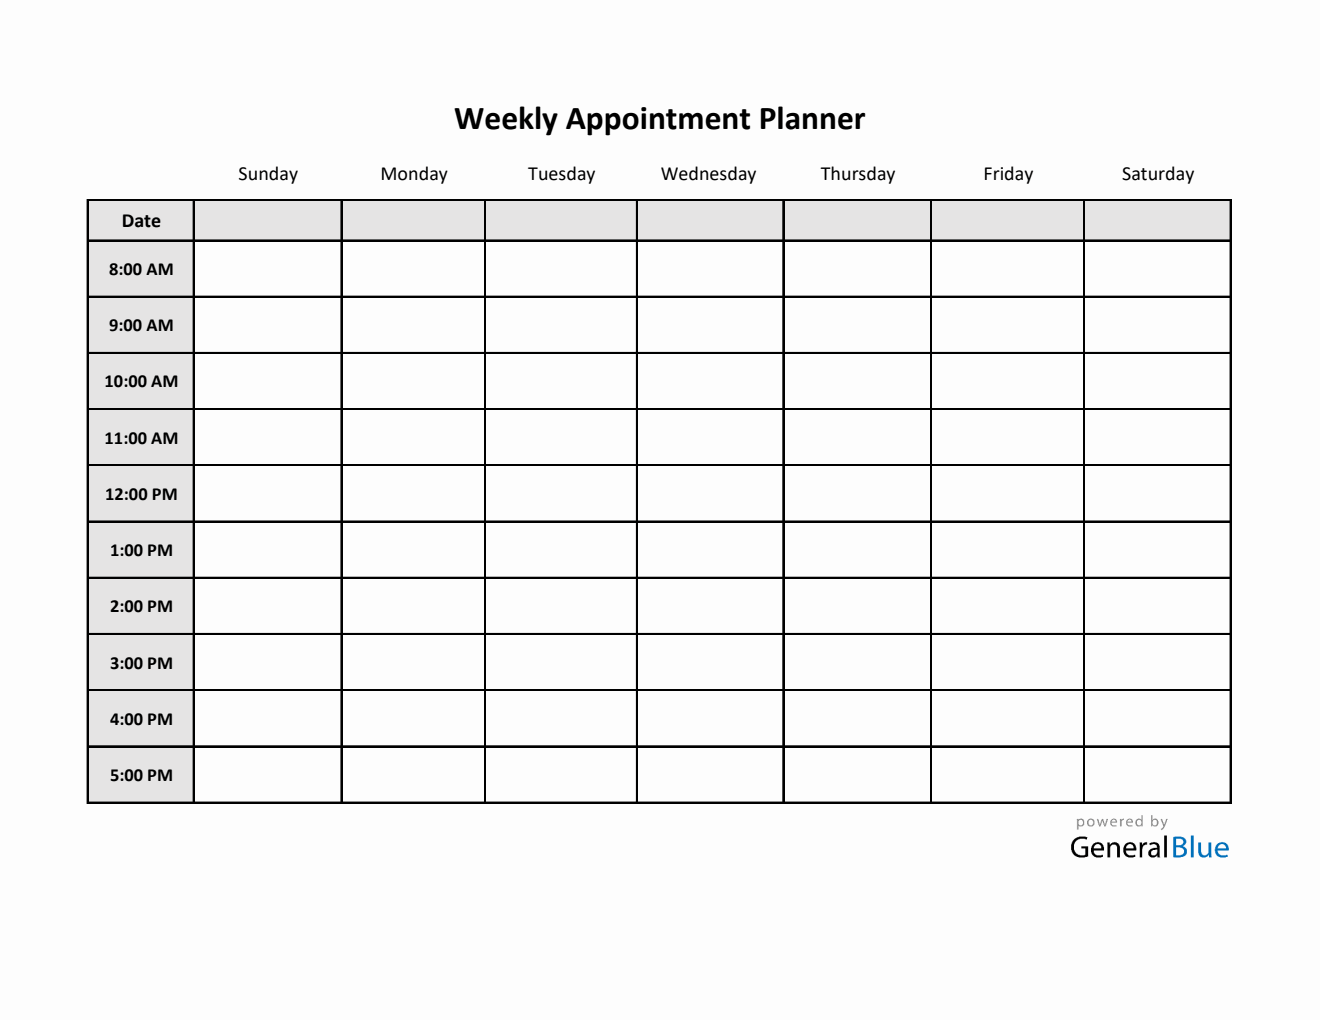 weekly-appointment-planner-in-excel-basic